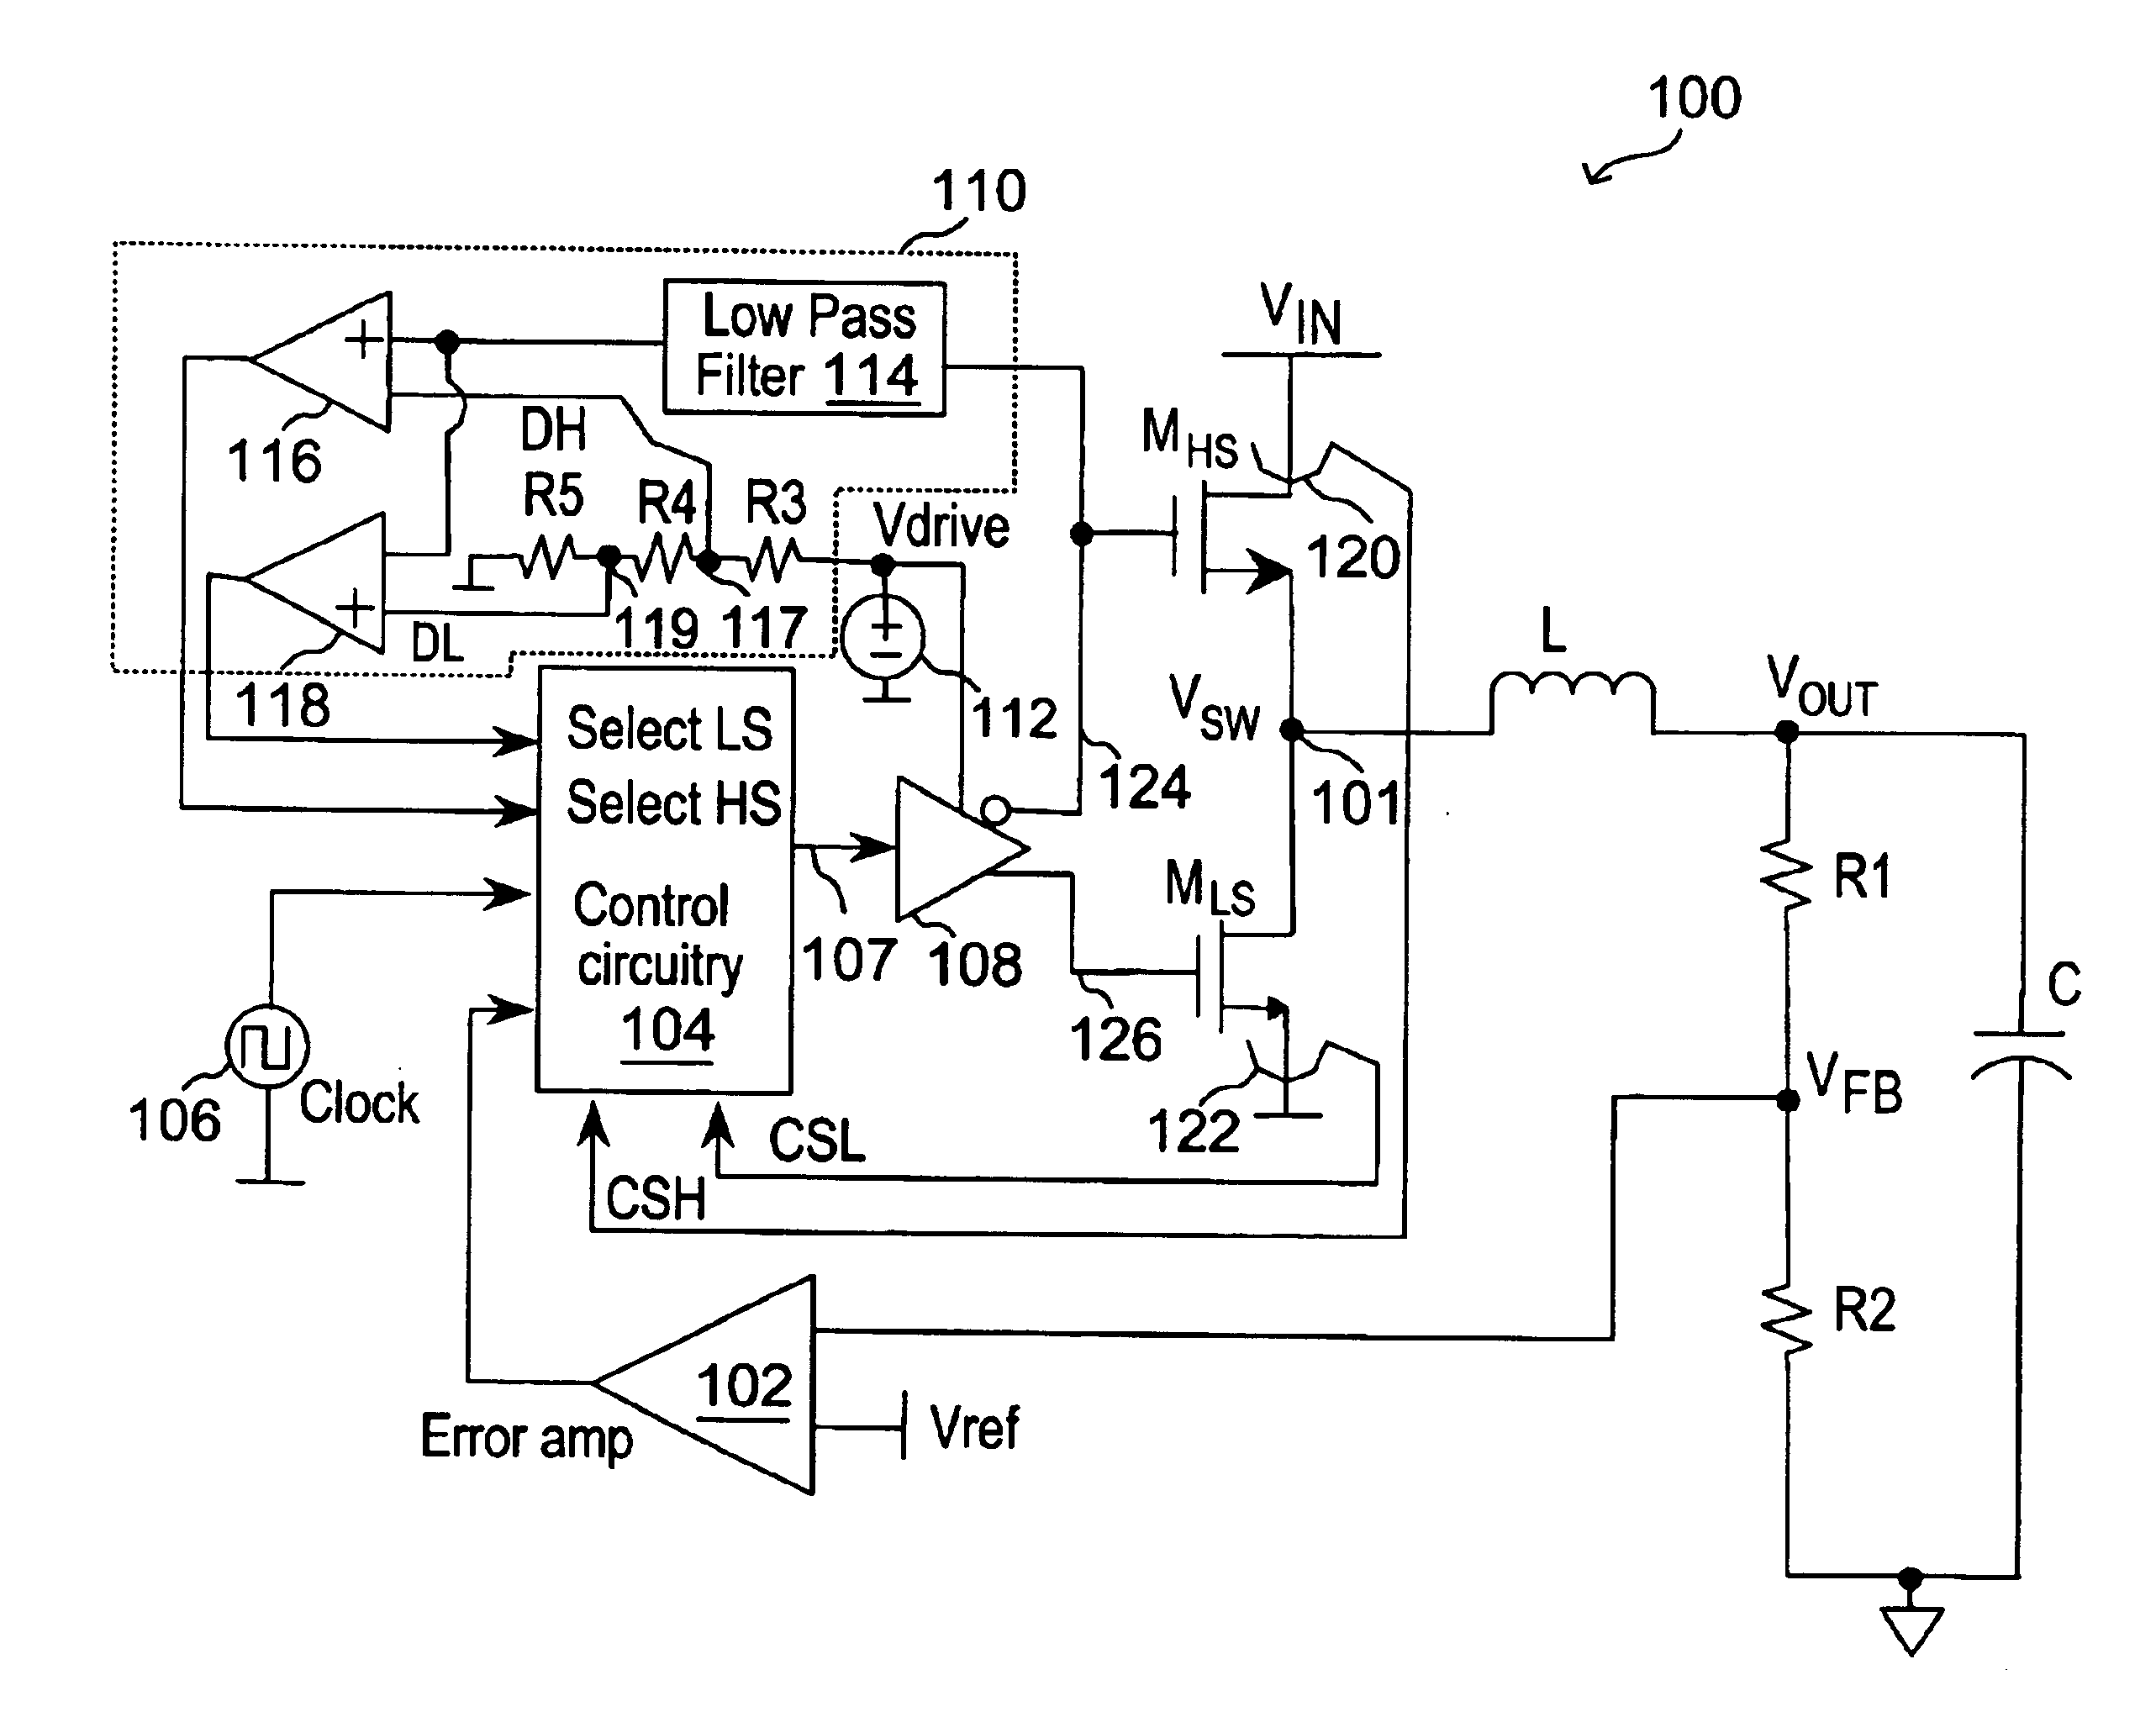 Selective high-side and low-side current sensing in switching power supplies